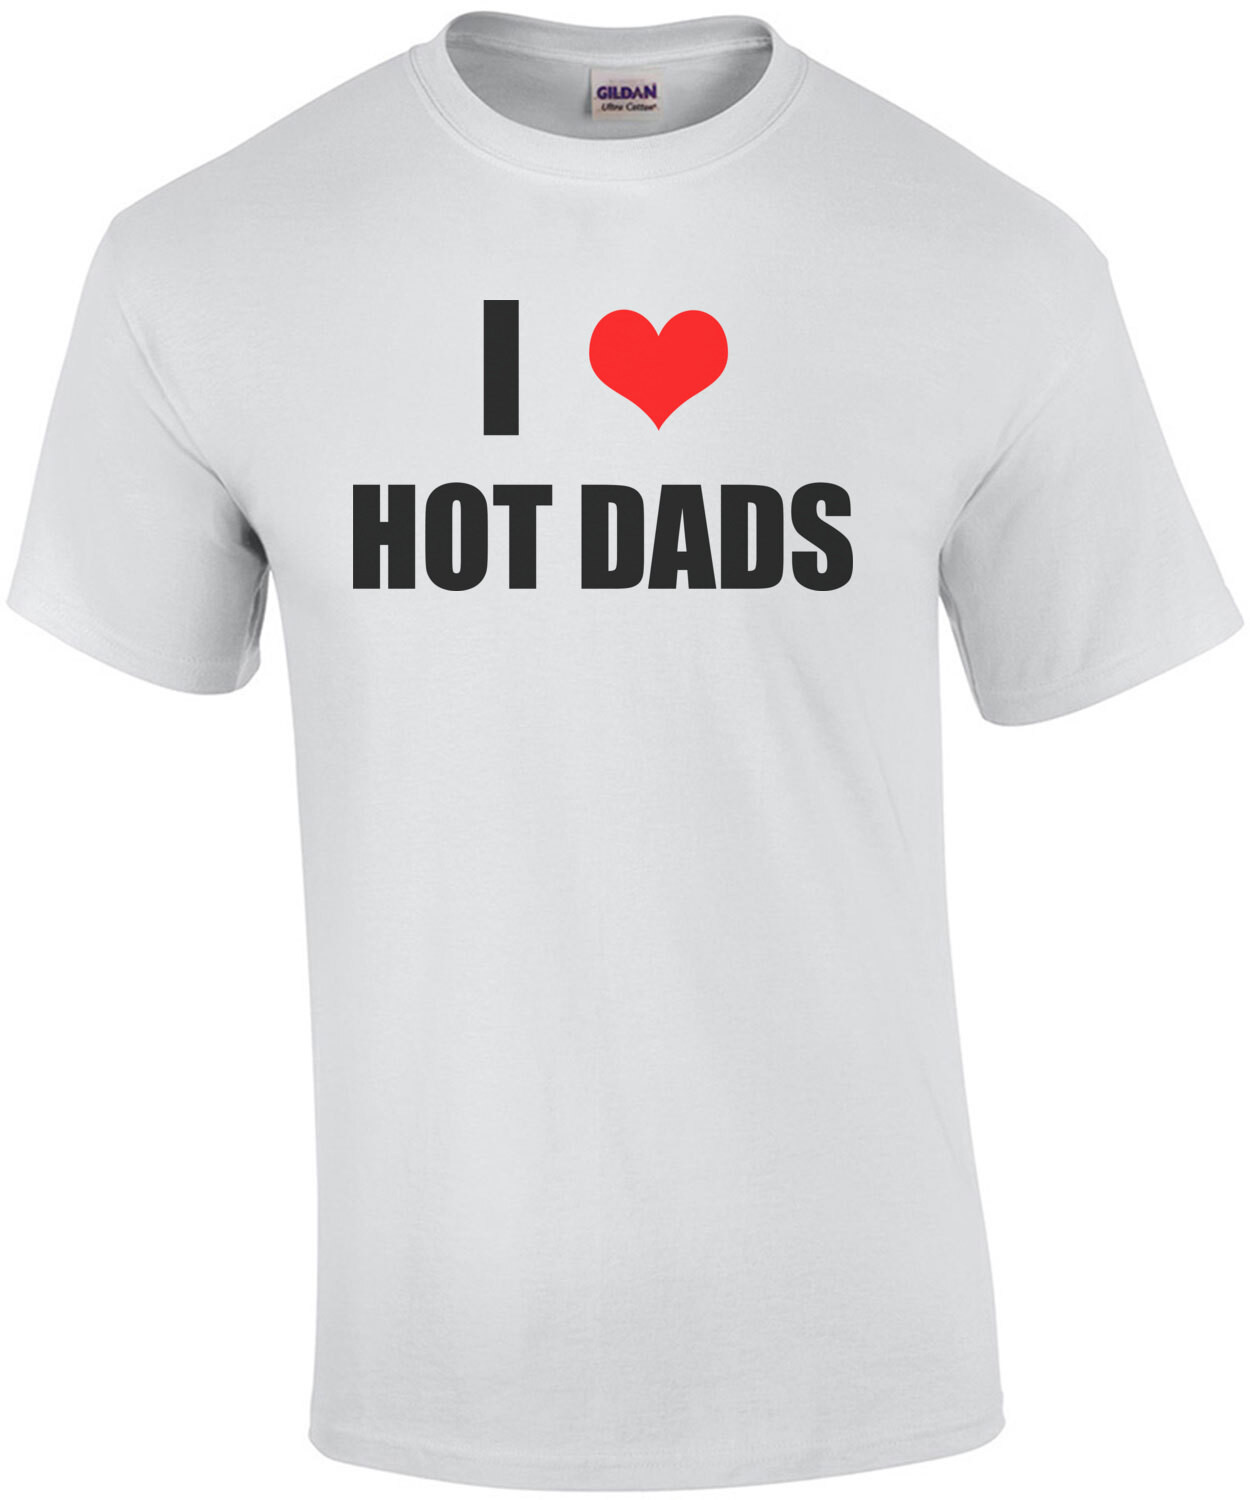 I (heart) Love Hot Dads - Funny T-Shirt